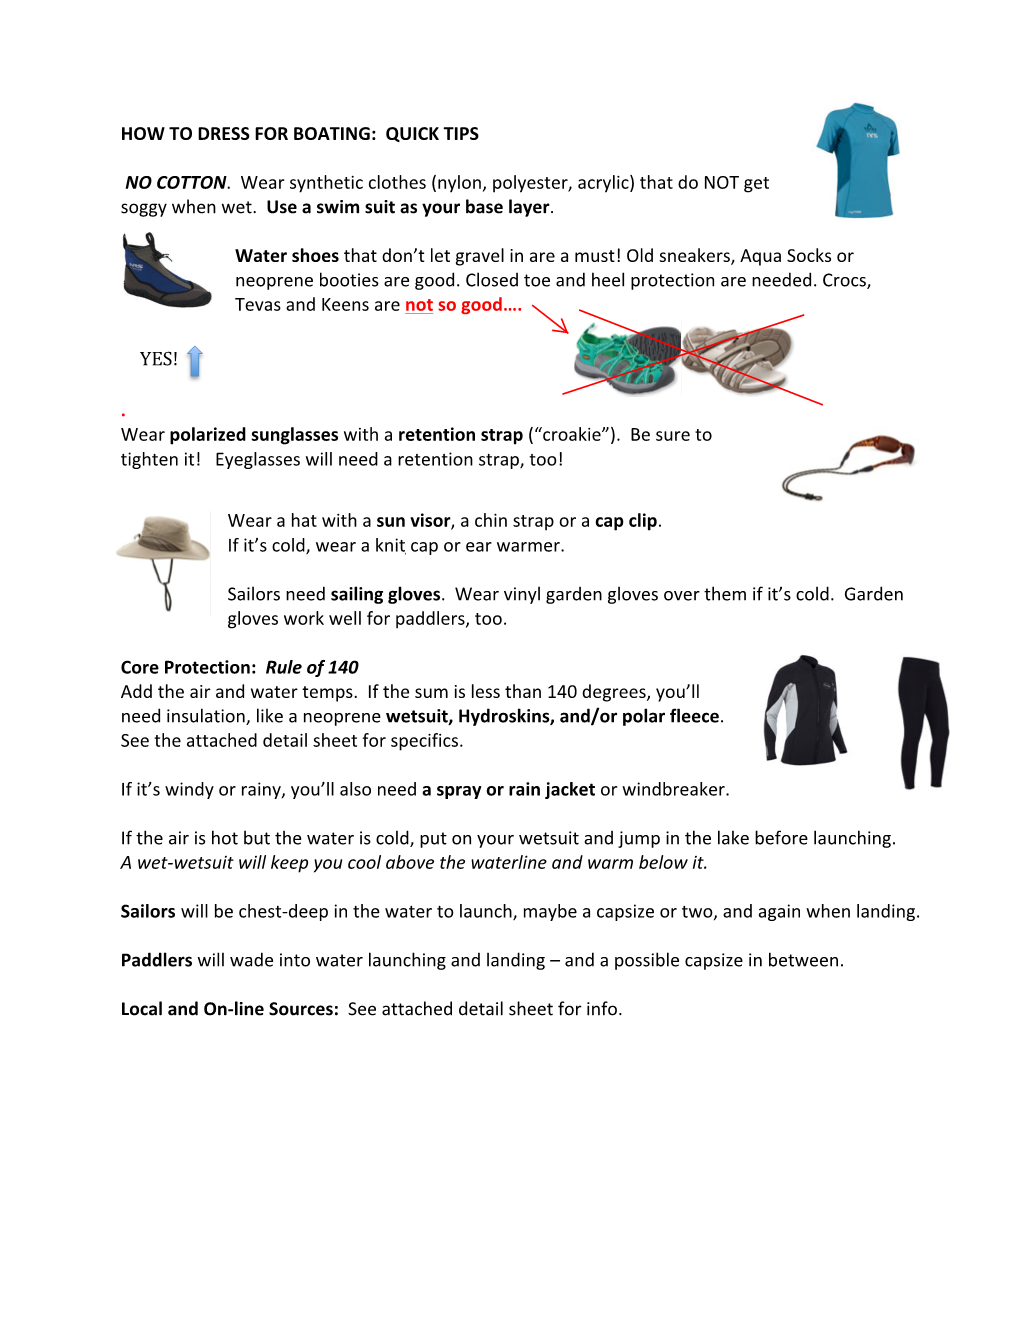 How to Dress for Boating: Quick Tips